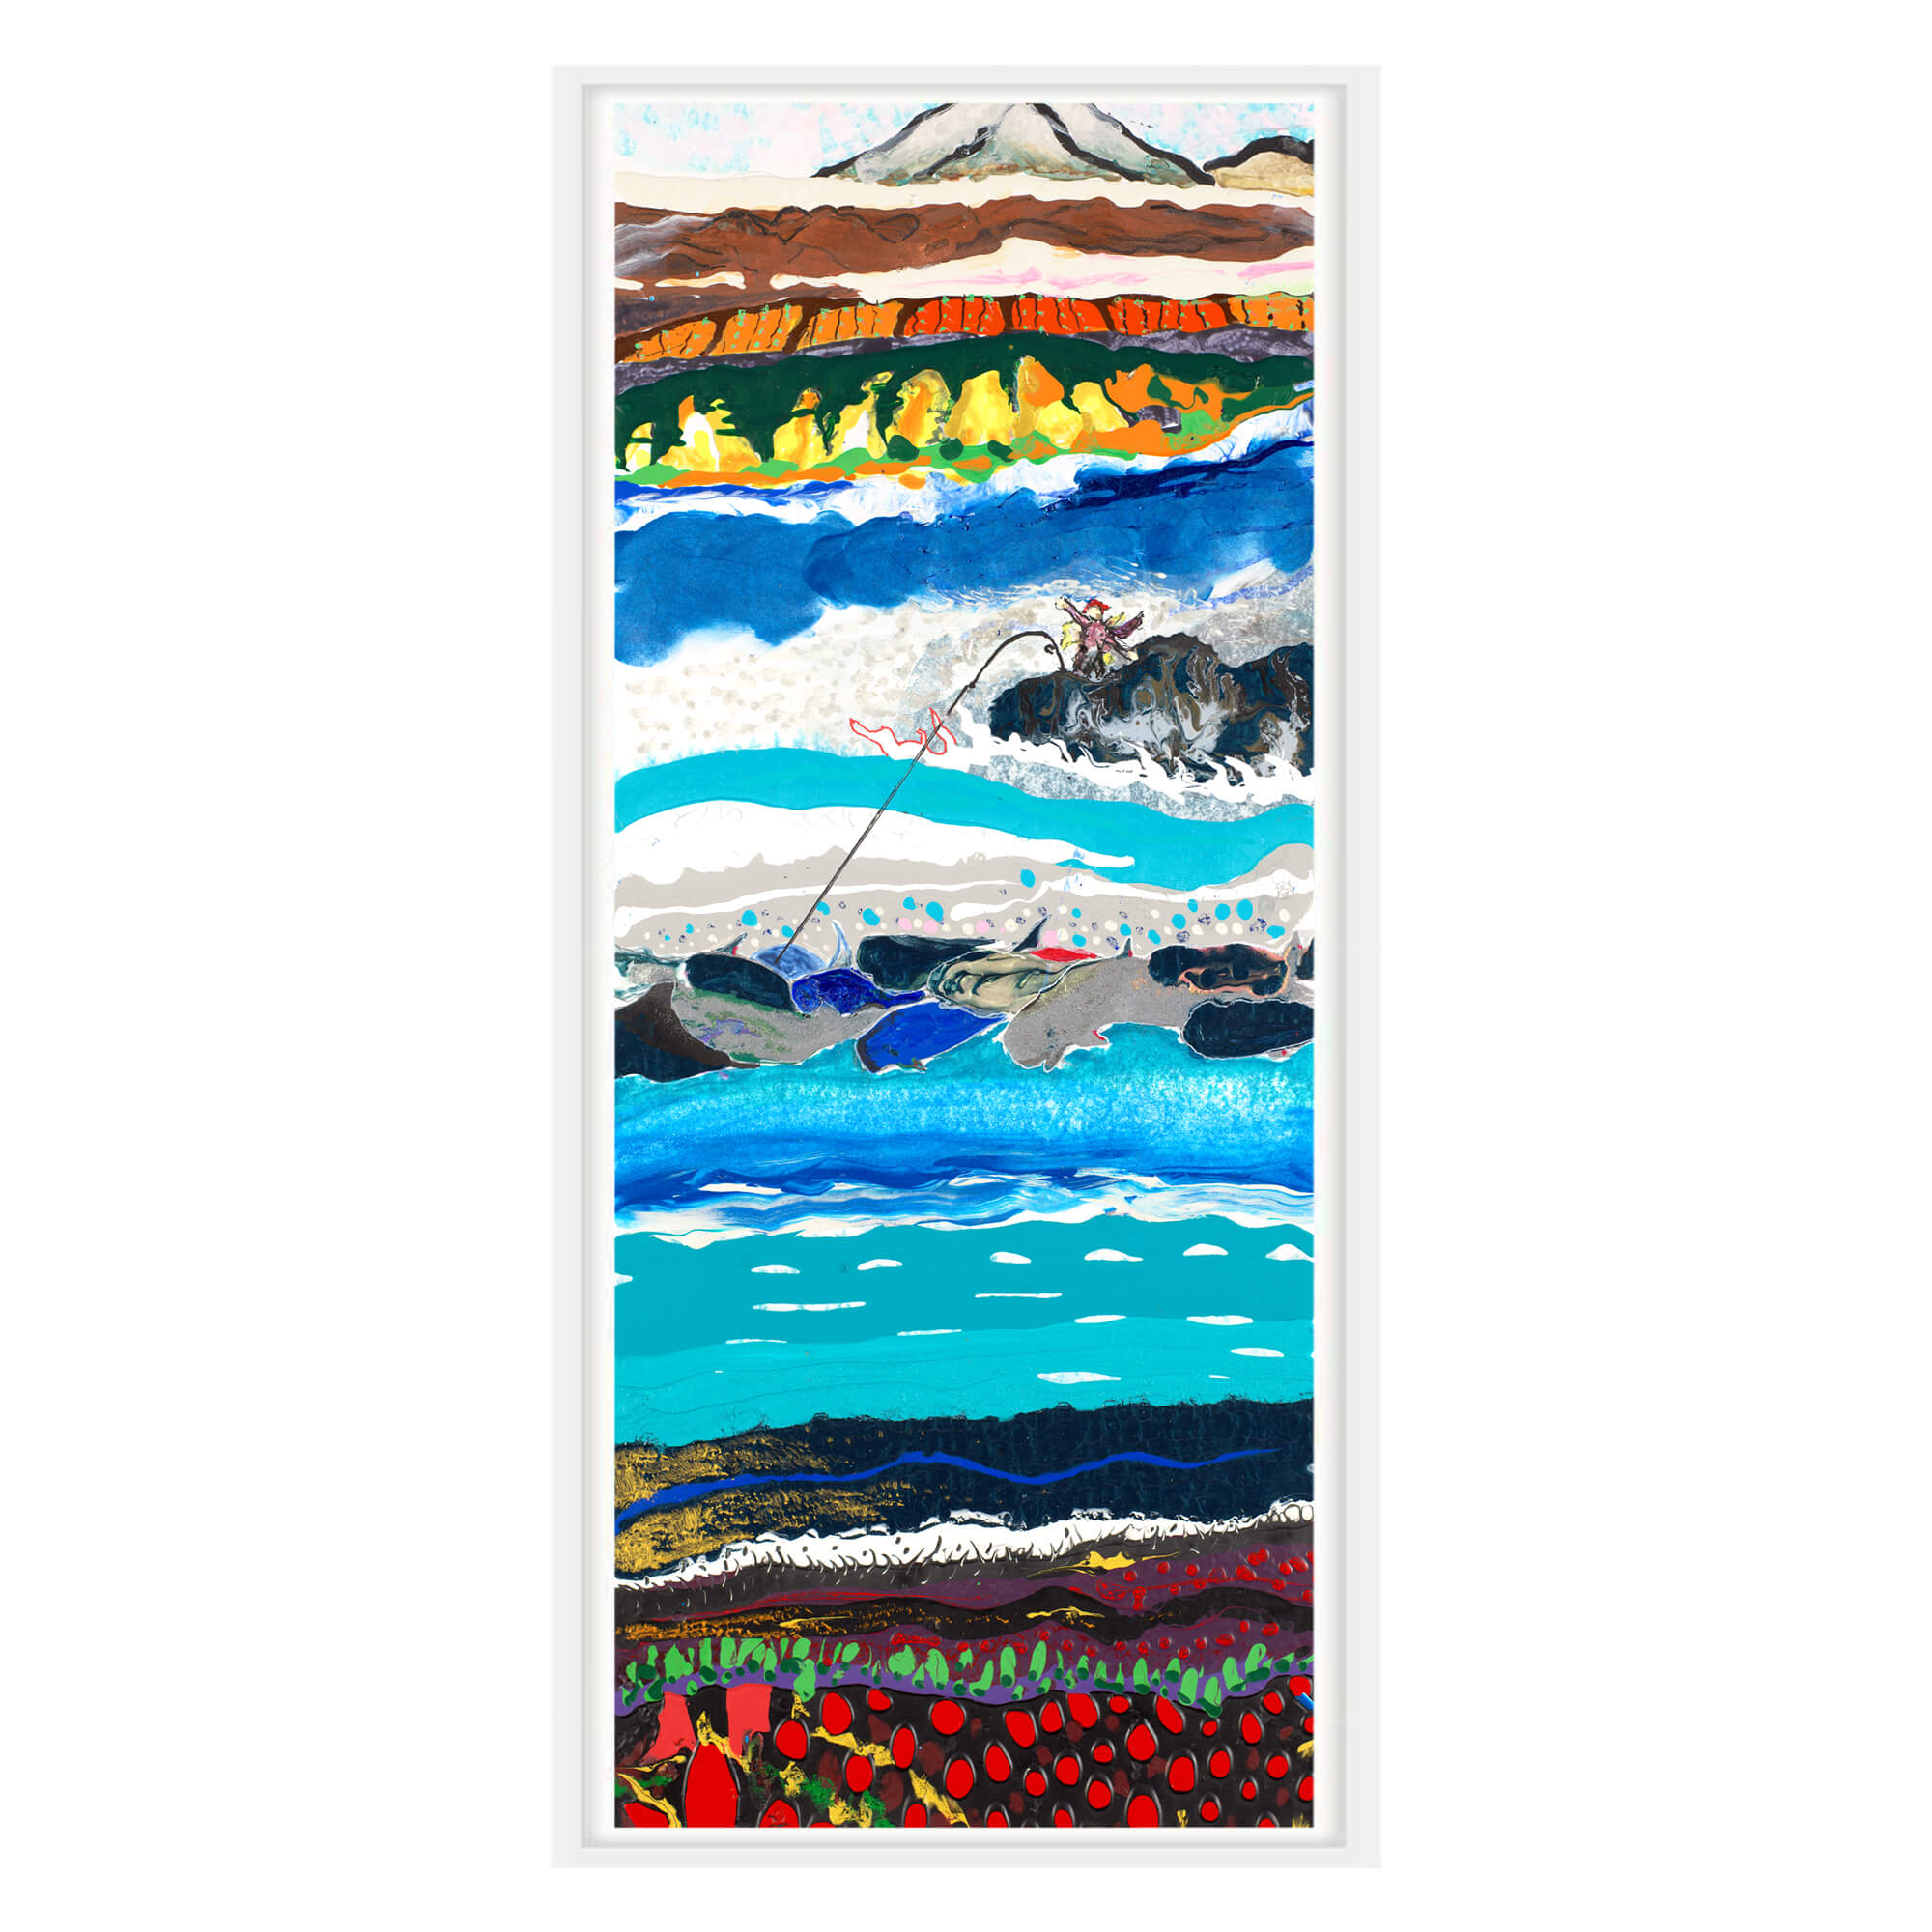 canvas art print of a tall mountain surrounded by a colorful landscape by Hawaii artist Robert Hazzard